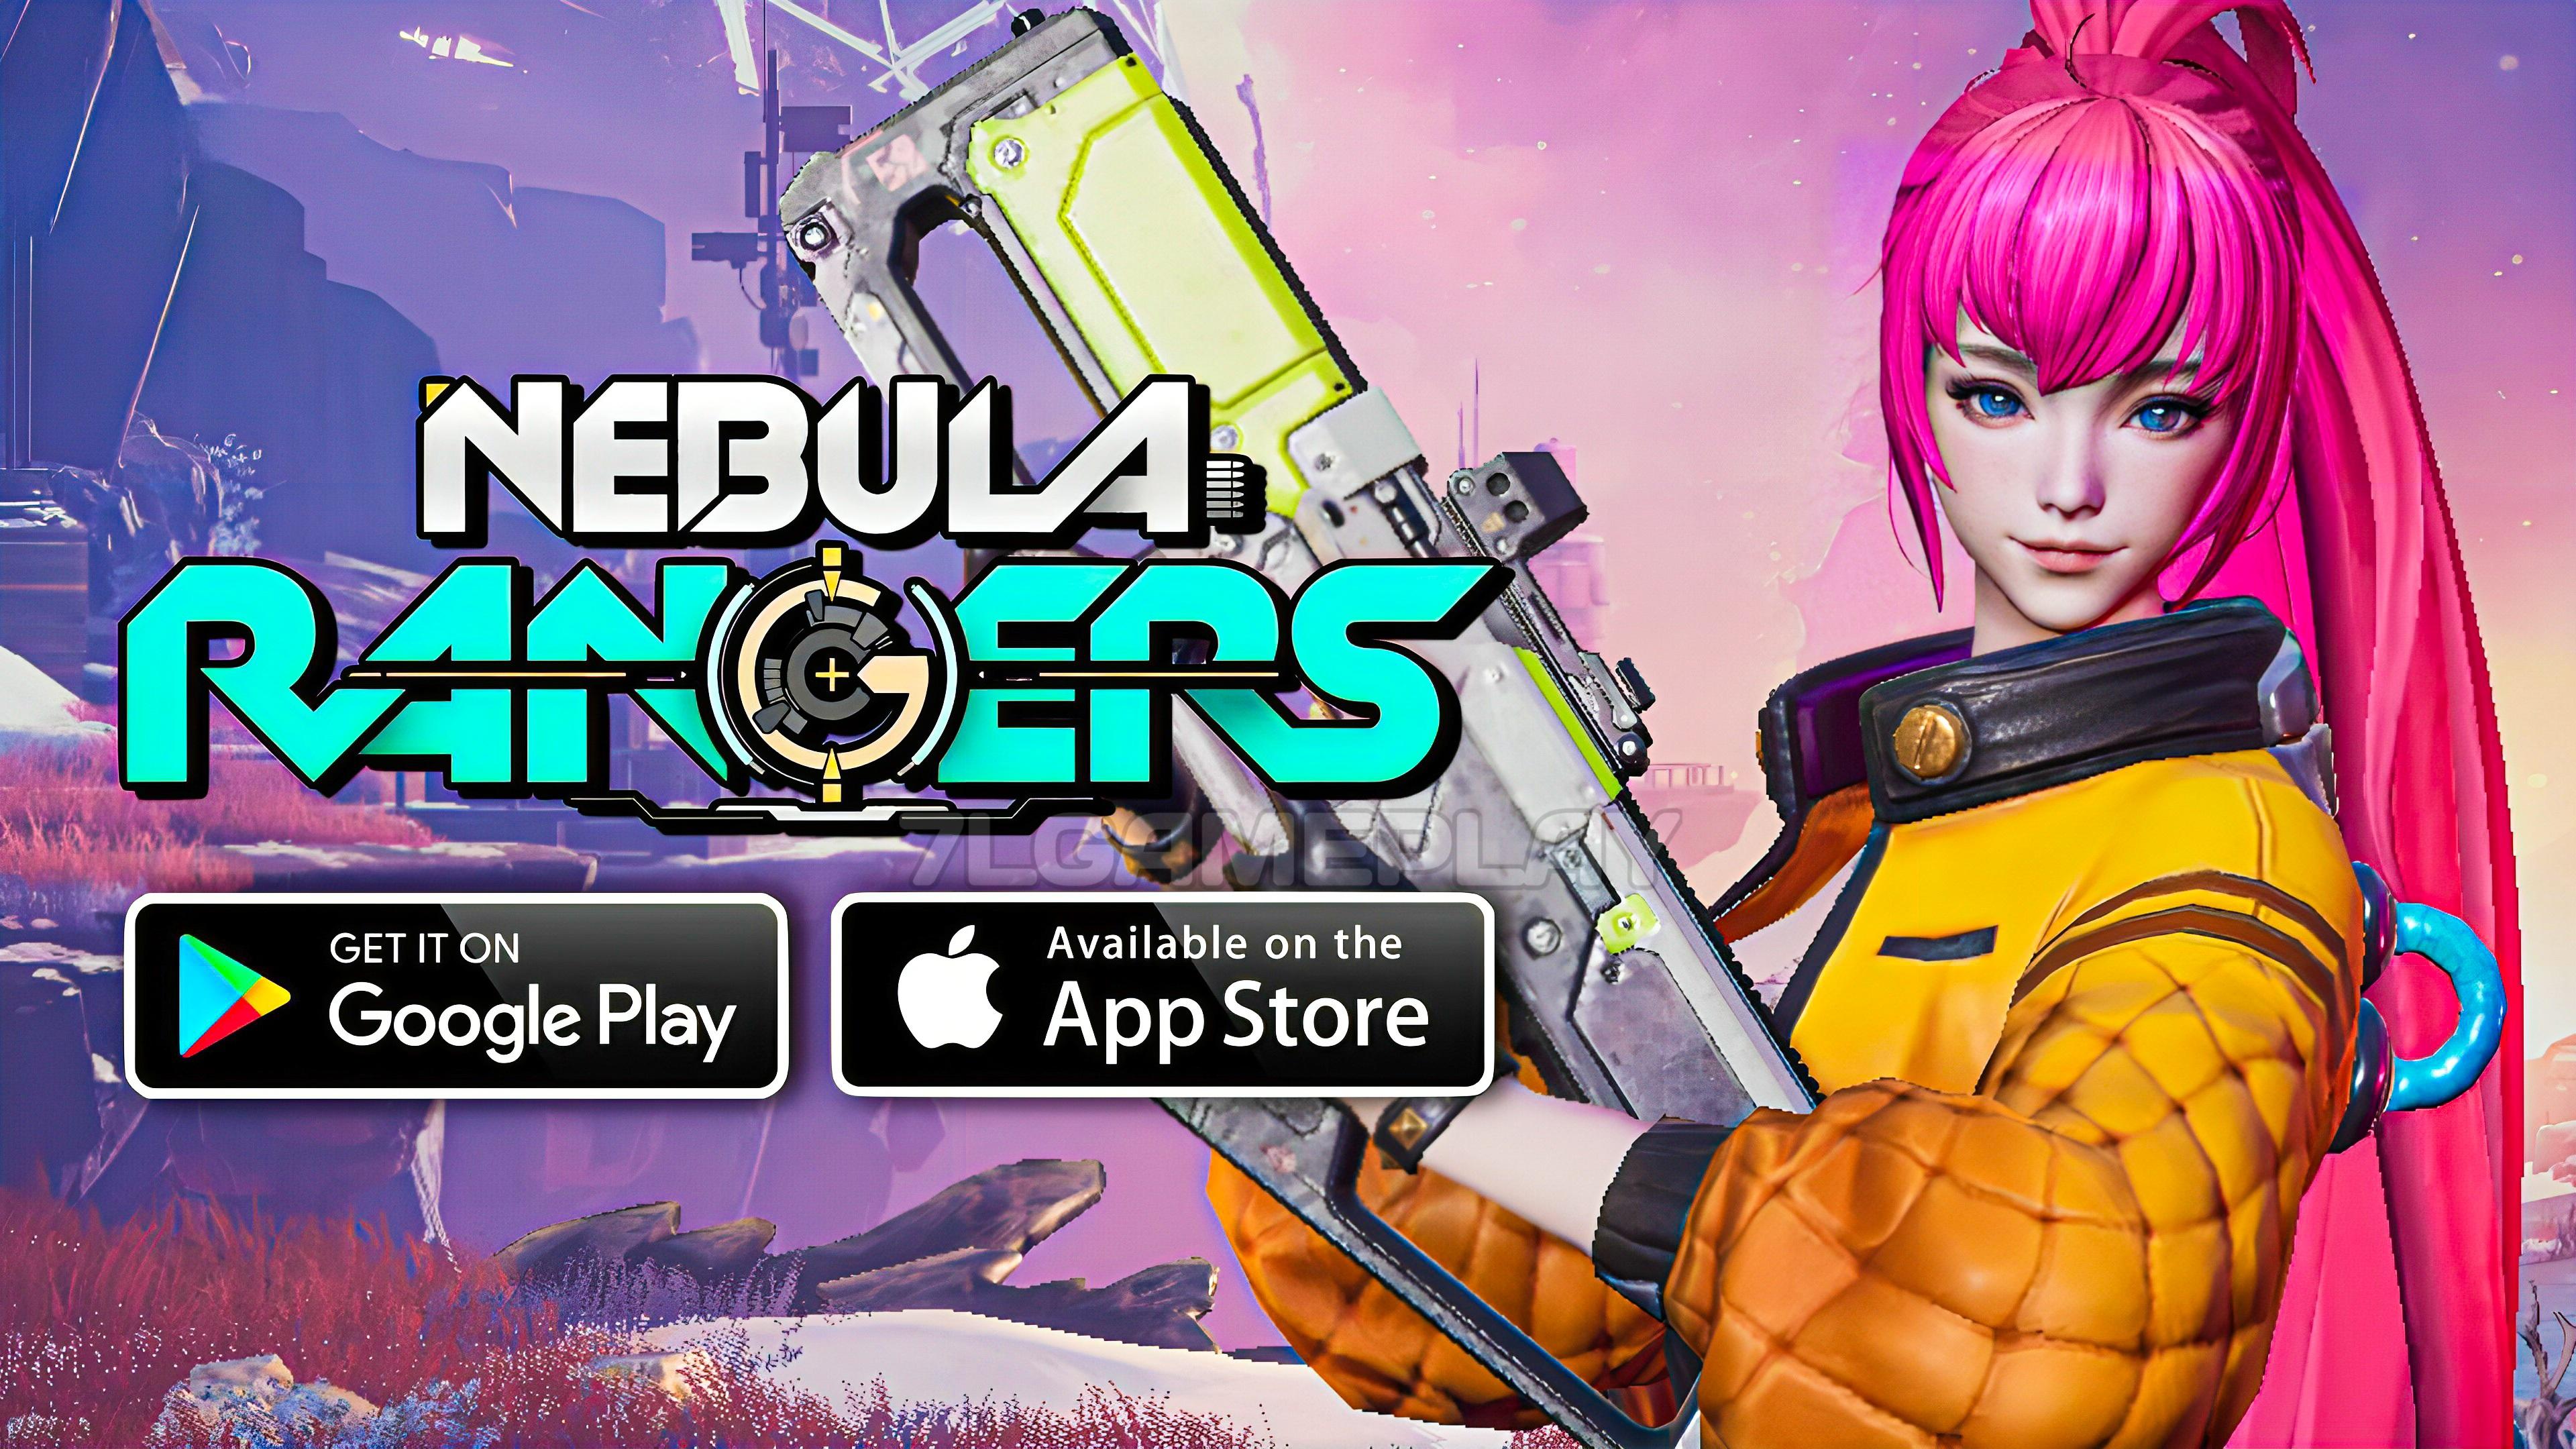 Nebula Rangers - Roguelike Action Shooter Gameplay Android / iOS